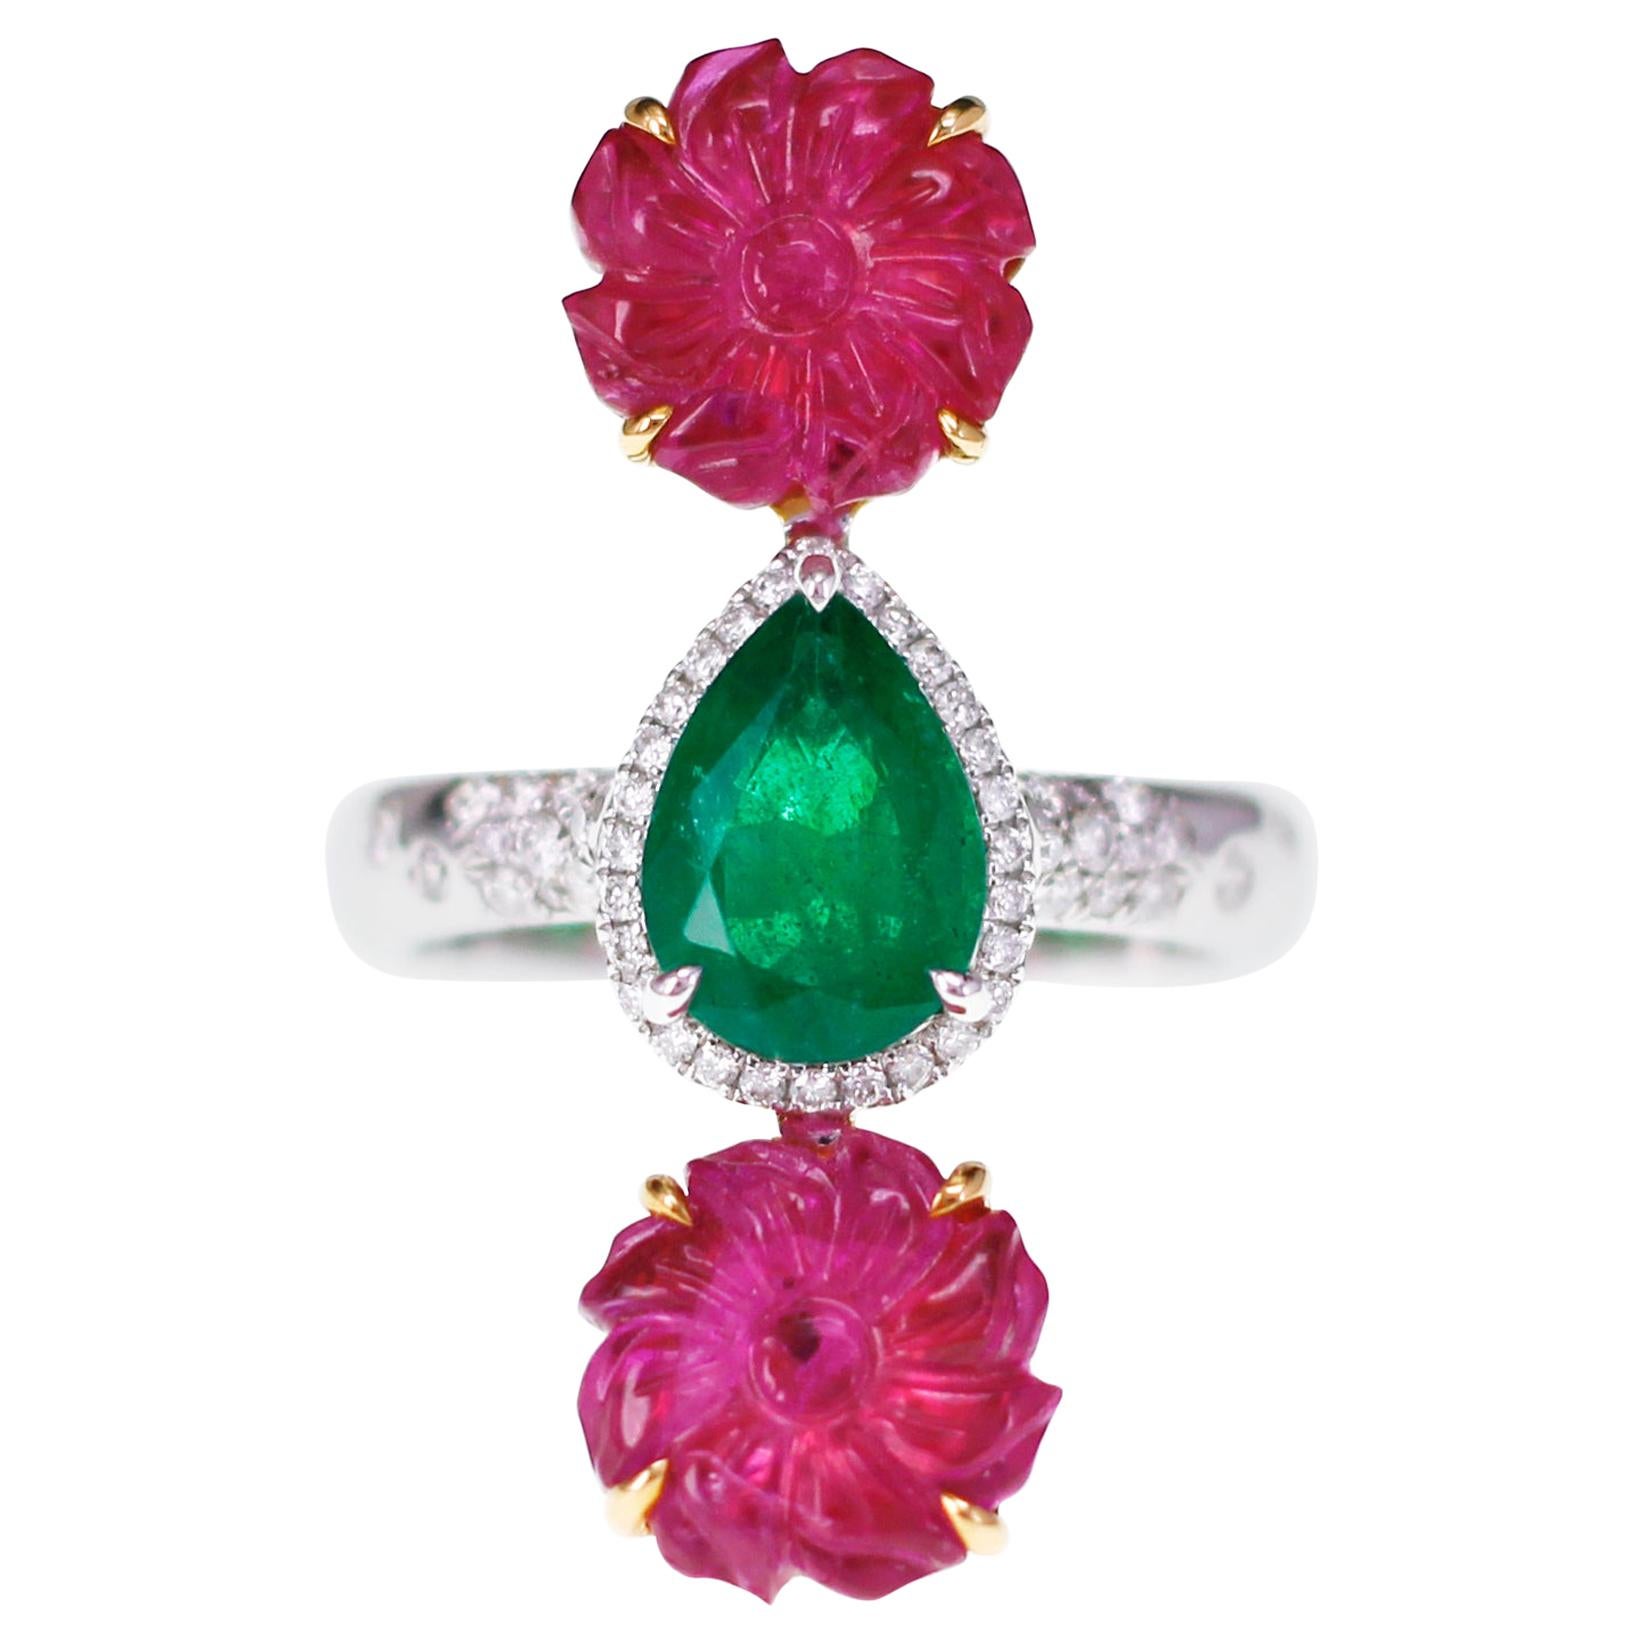 6 Carat Antique Ruby Carving with 1.55 Carat Vivid Green Emerald